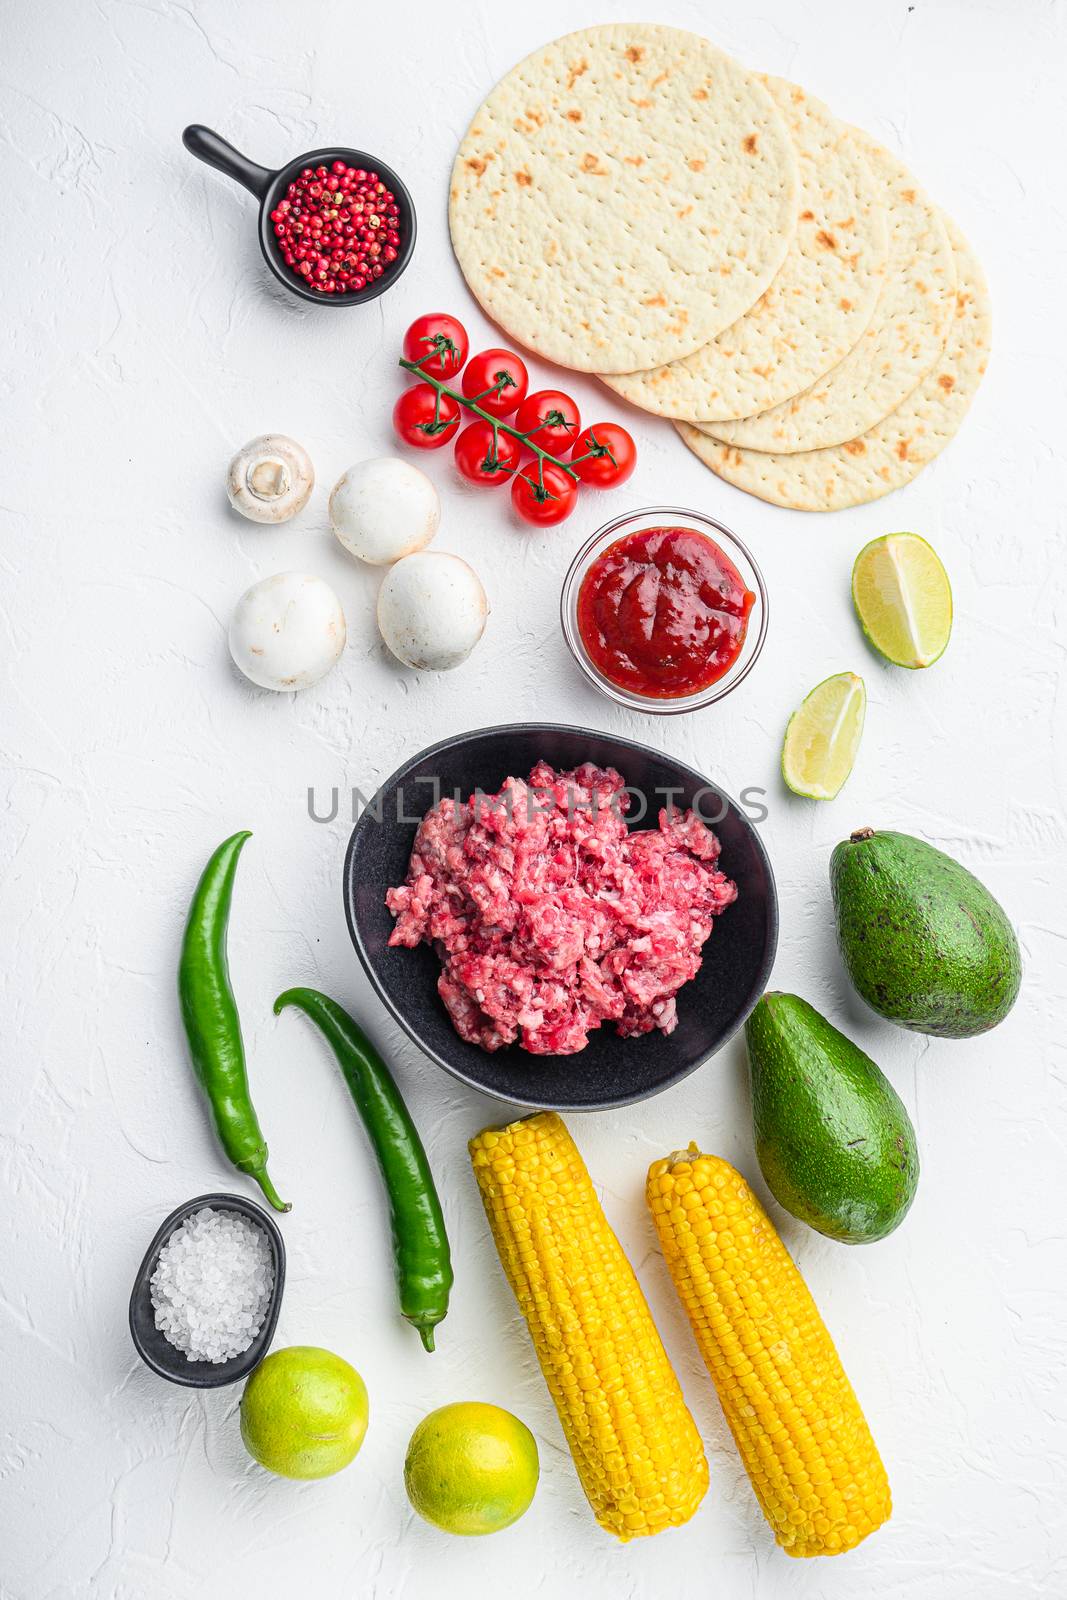 Taco ingredients homemade authentic mexican beef meal, over white concrete background top view. by Ilianesolenyi